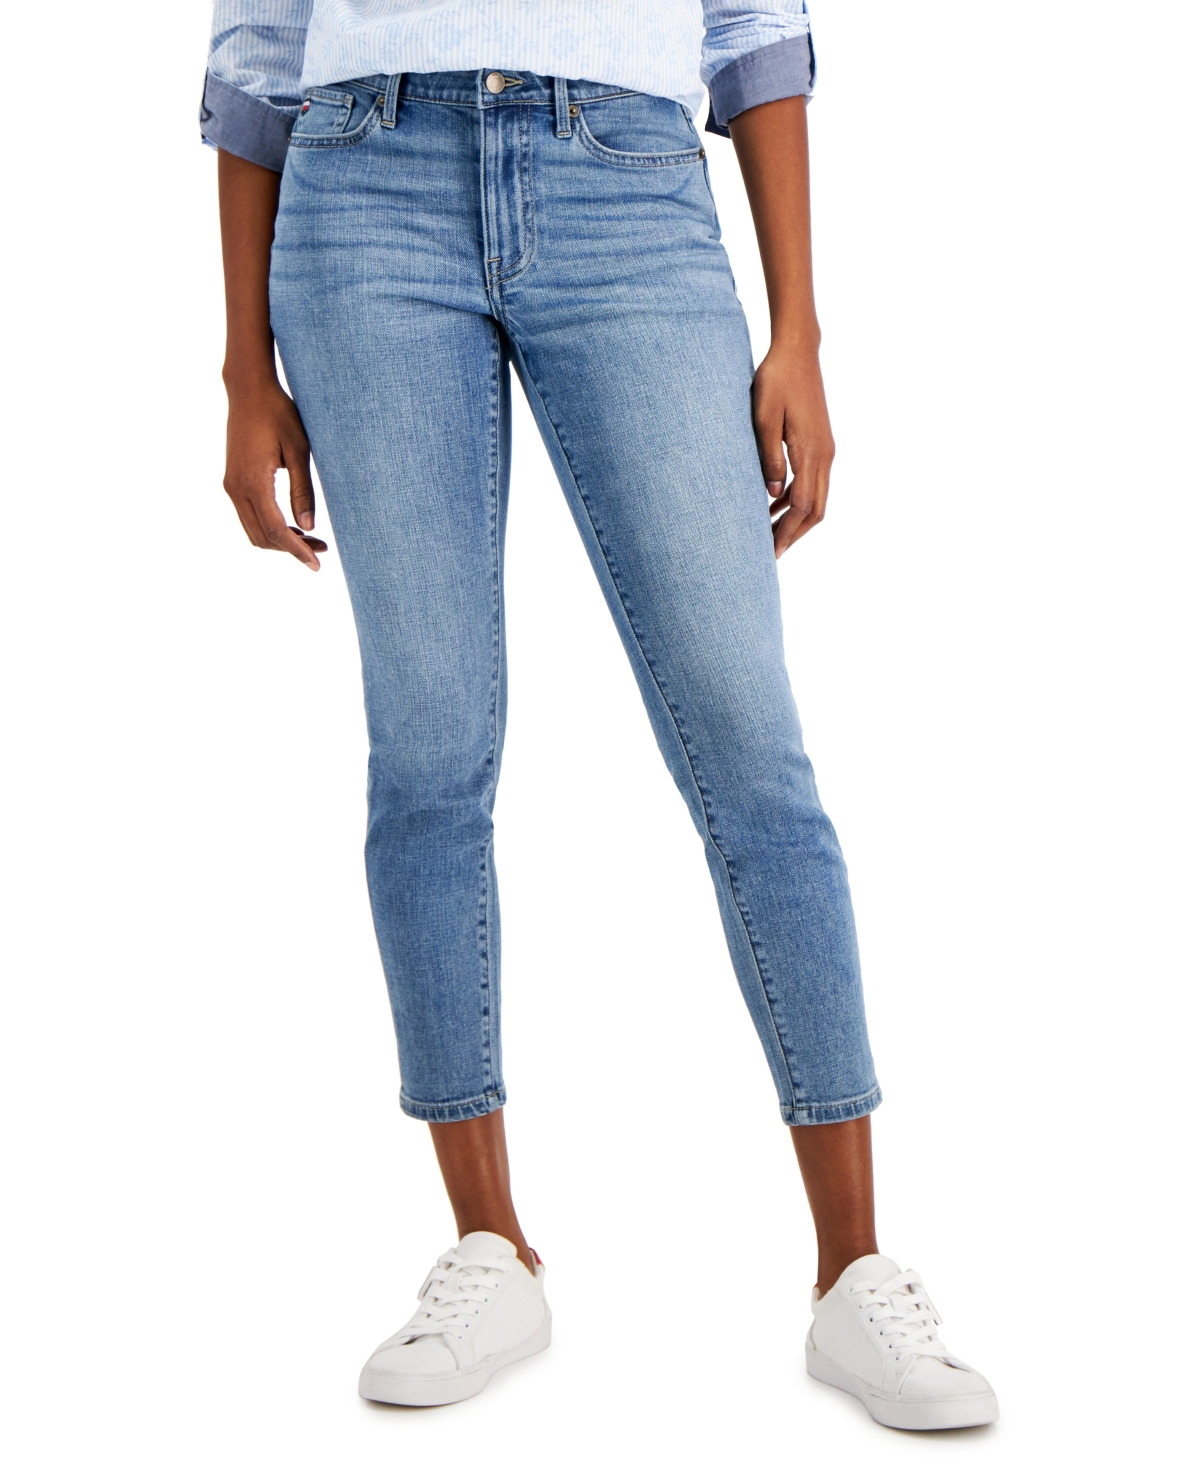 Tommy Hilfiger Th Flex Curvy Fit Skinny Ankle Jeans